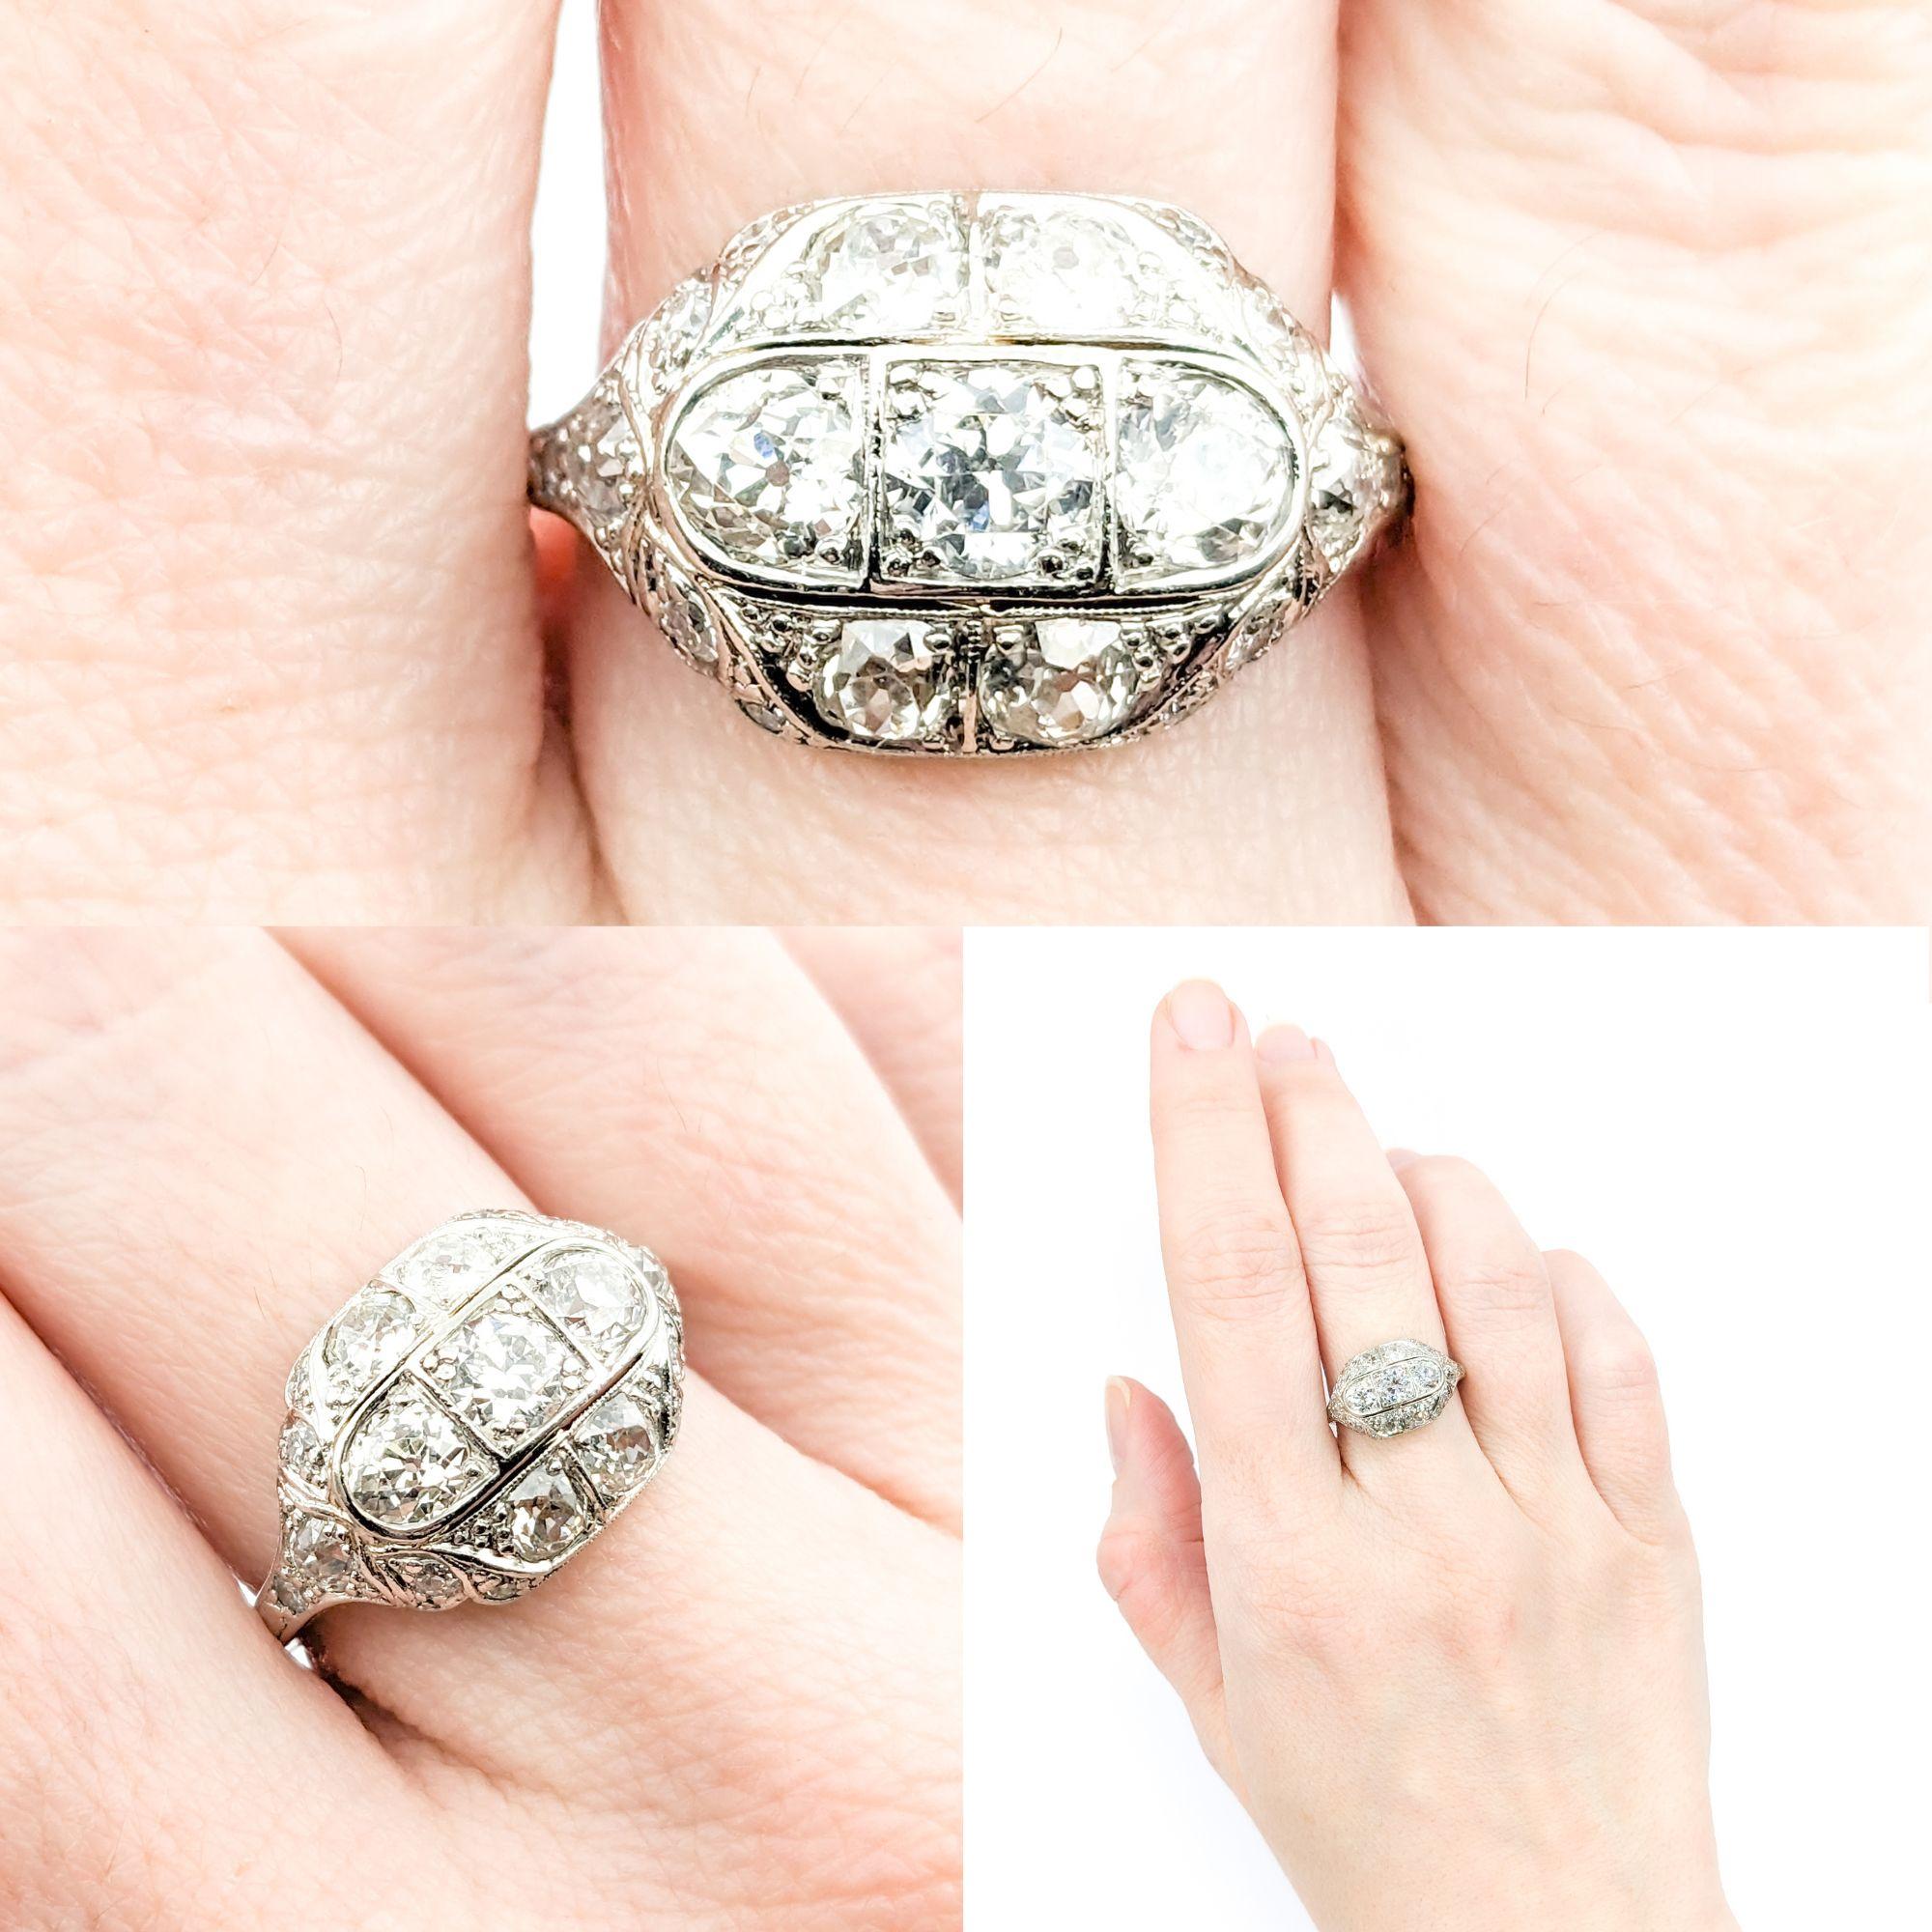 Antique 2.40ctw Mine Cut Diamonds Ring In Platinum

Presenting an exquisite Antique Ring, meticulously crafted from 900pt platinum. This ring showcases a stunning centerpiece of 2.40ctw mine cut diamonds, set within an Art Deco Shield design that